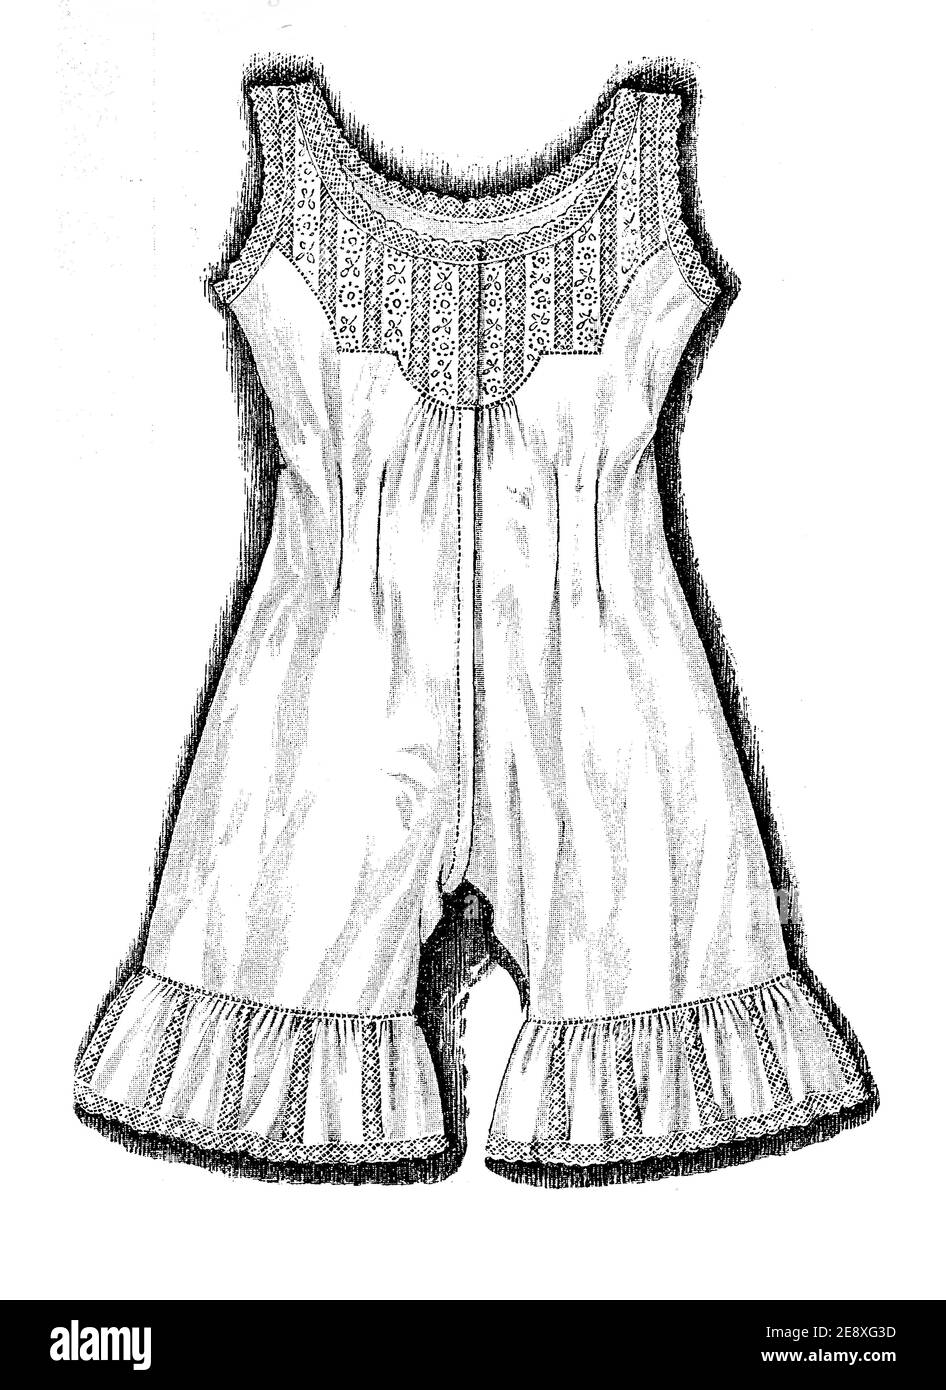 Ladies Fashion 1908,reform lingerie: split-drawers combined with a chemise, rational dressing more comfortable and suitable for a modern lifestyle with a smoother silhouette Stock Photo